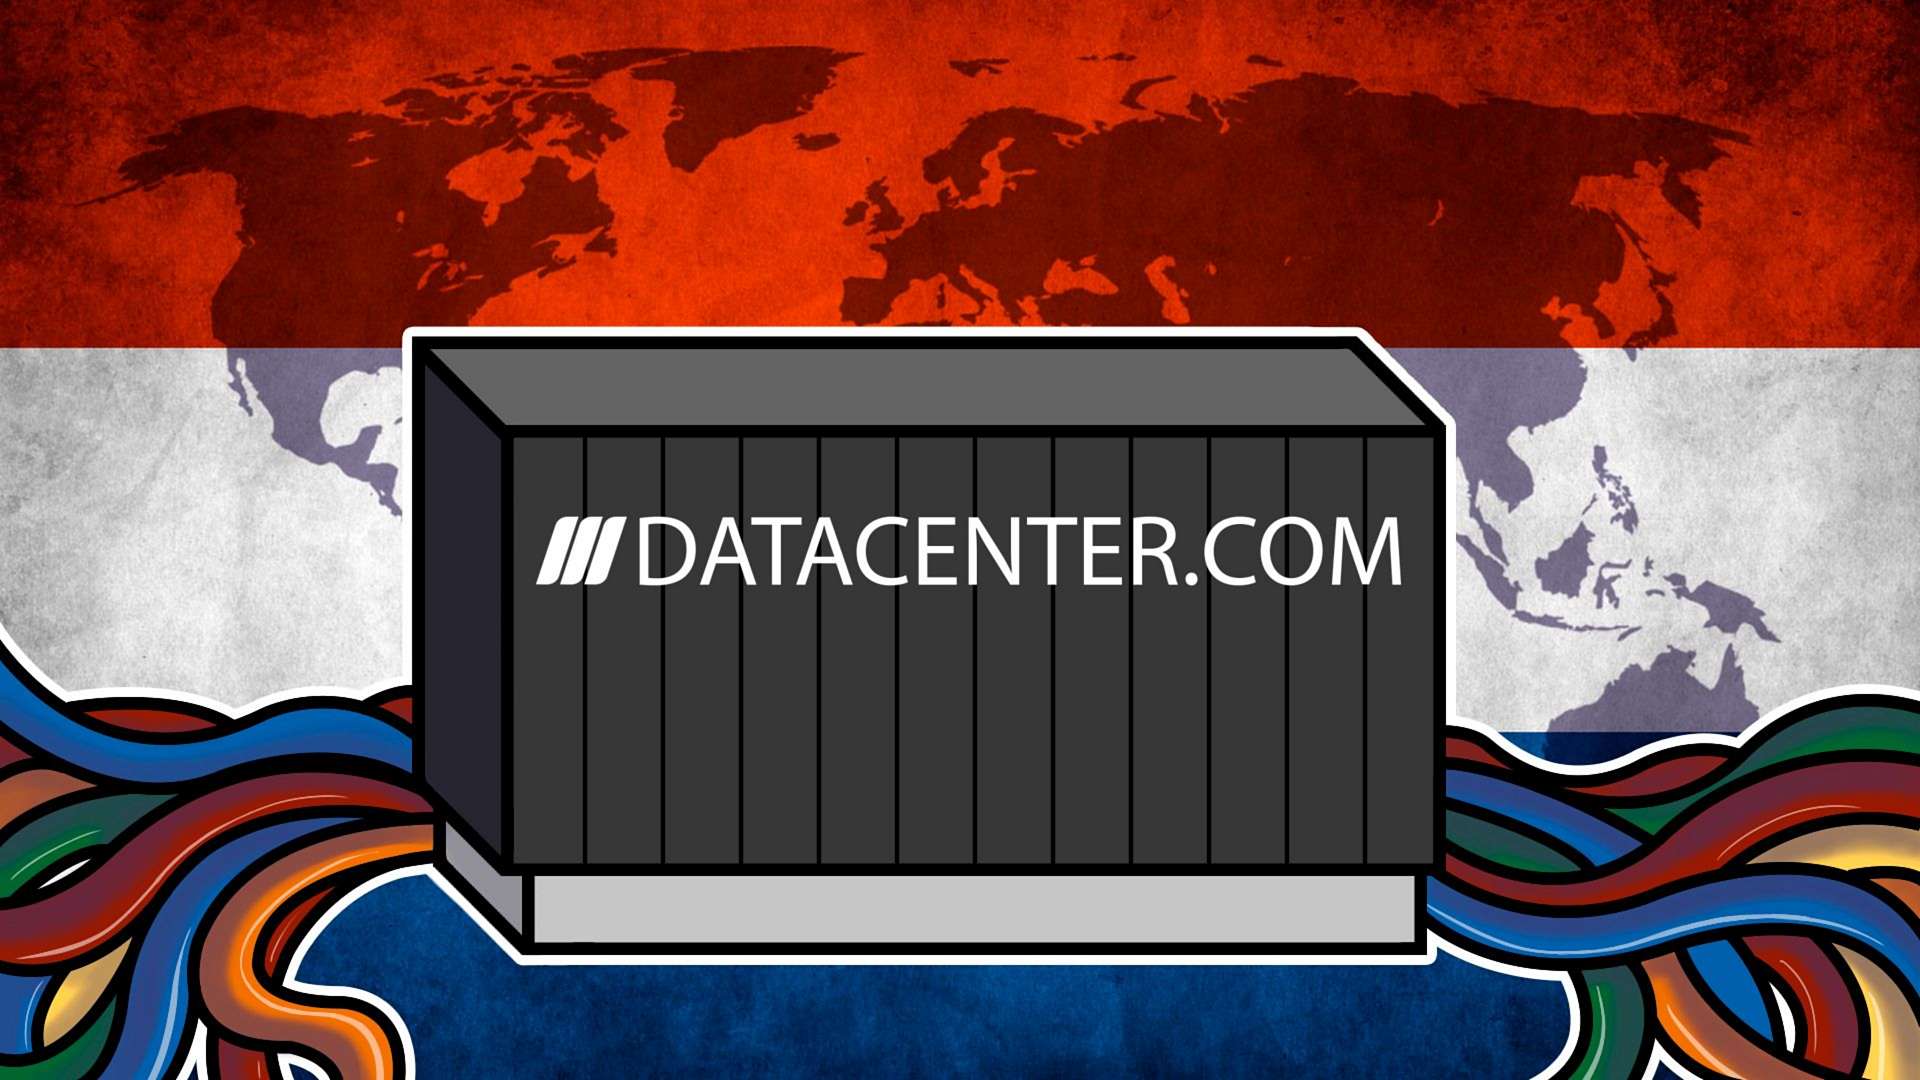 The Excellence Data Architecture Design Award is given to Datacenter.com